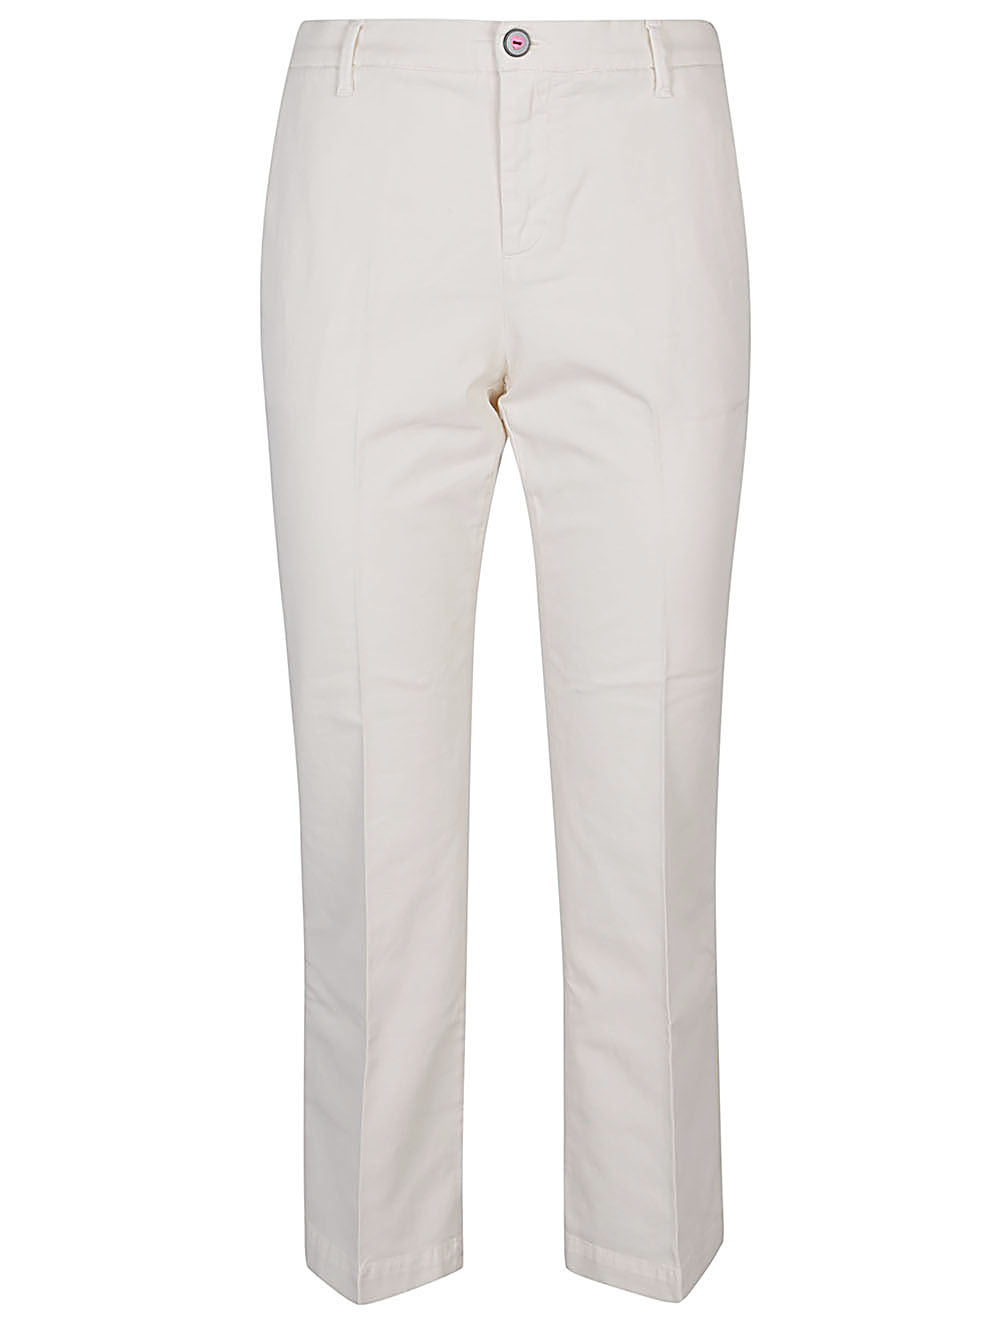 I Love My Pants I LOVE MY PANTS- Bella Embroidered Cotton Trousers